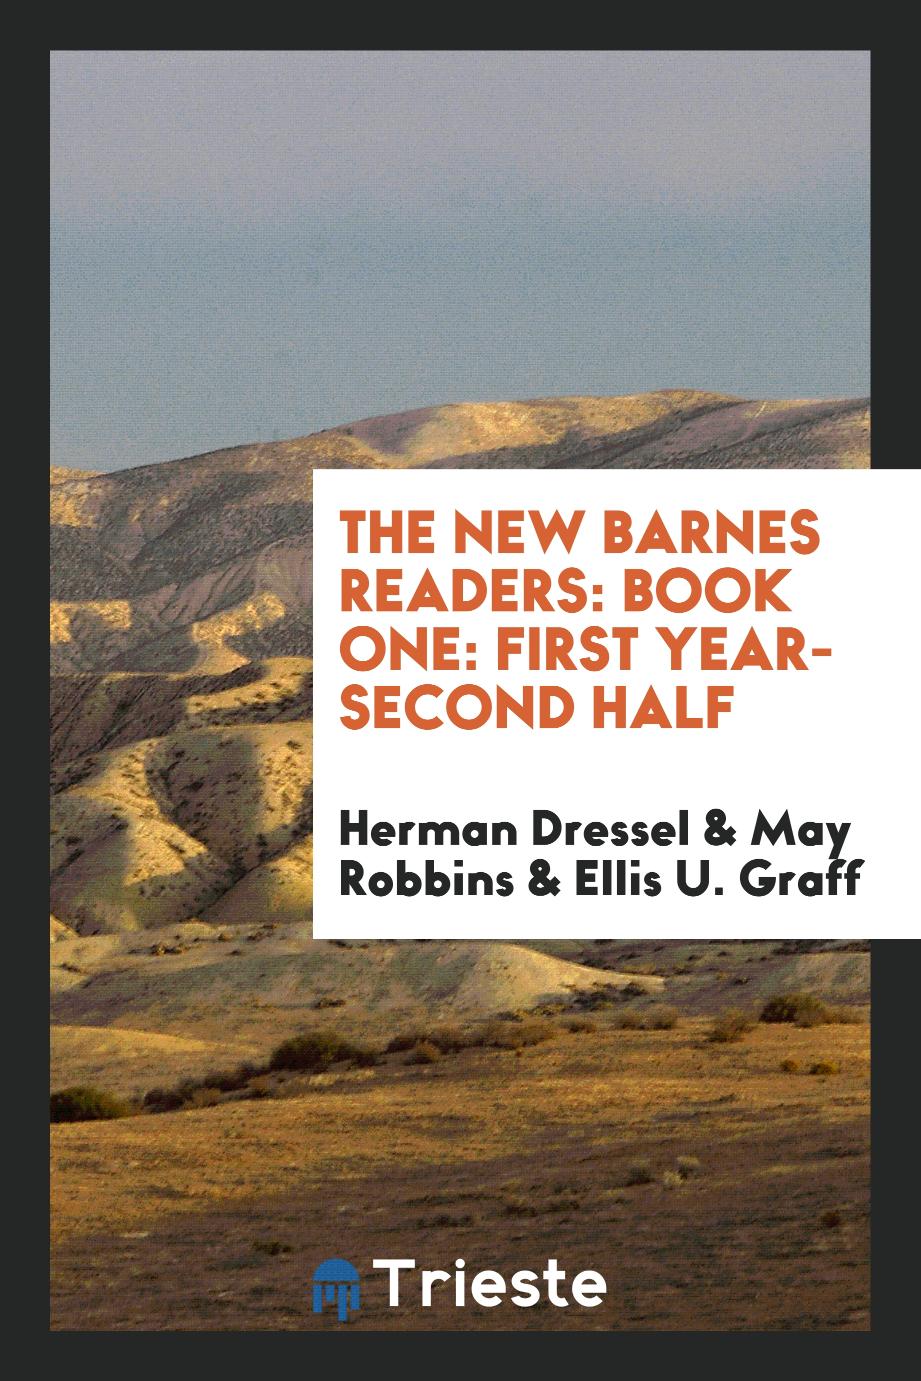 The New Barnes Readers: Book One: First Year-Second Half